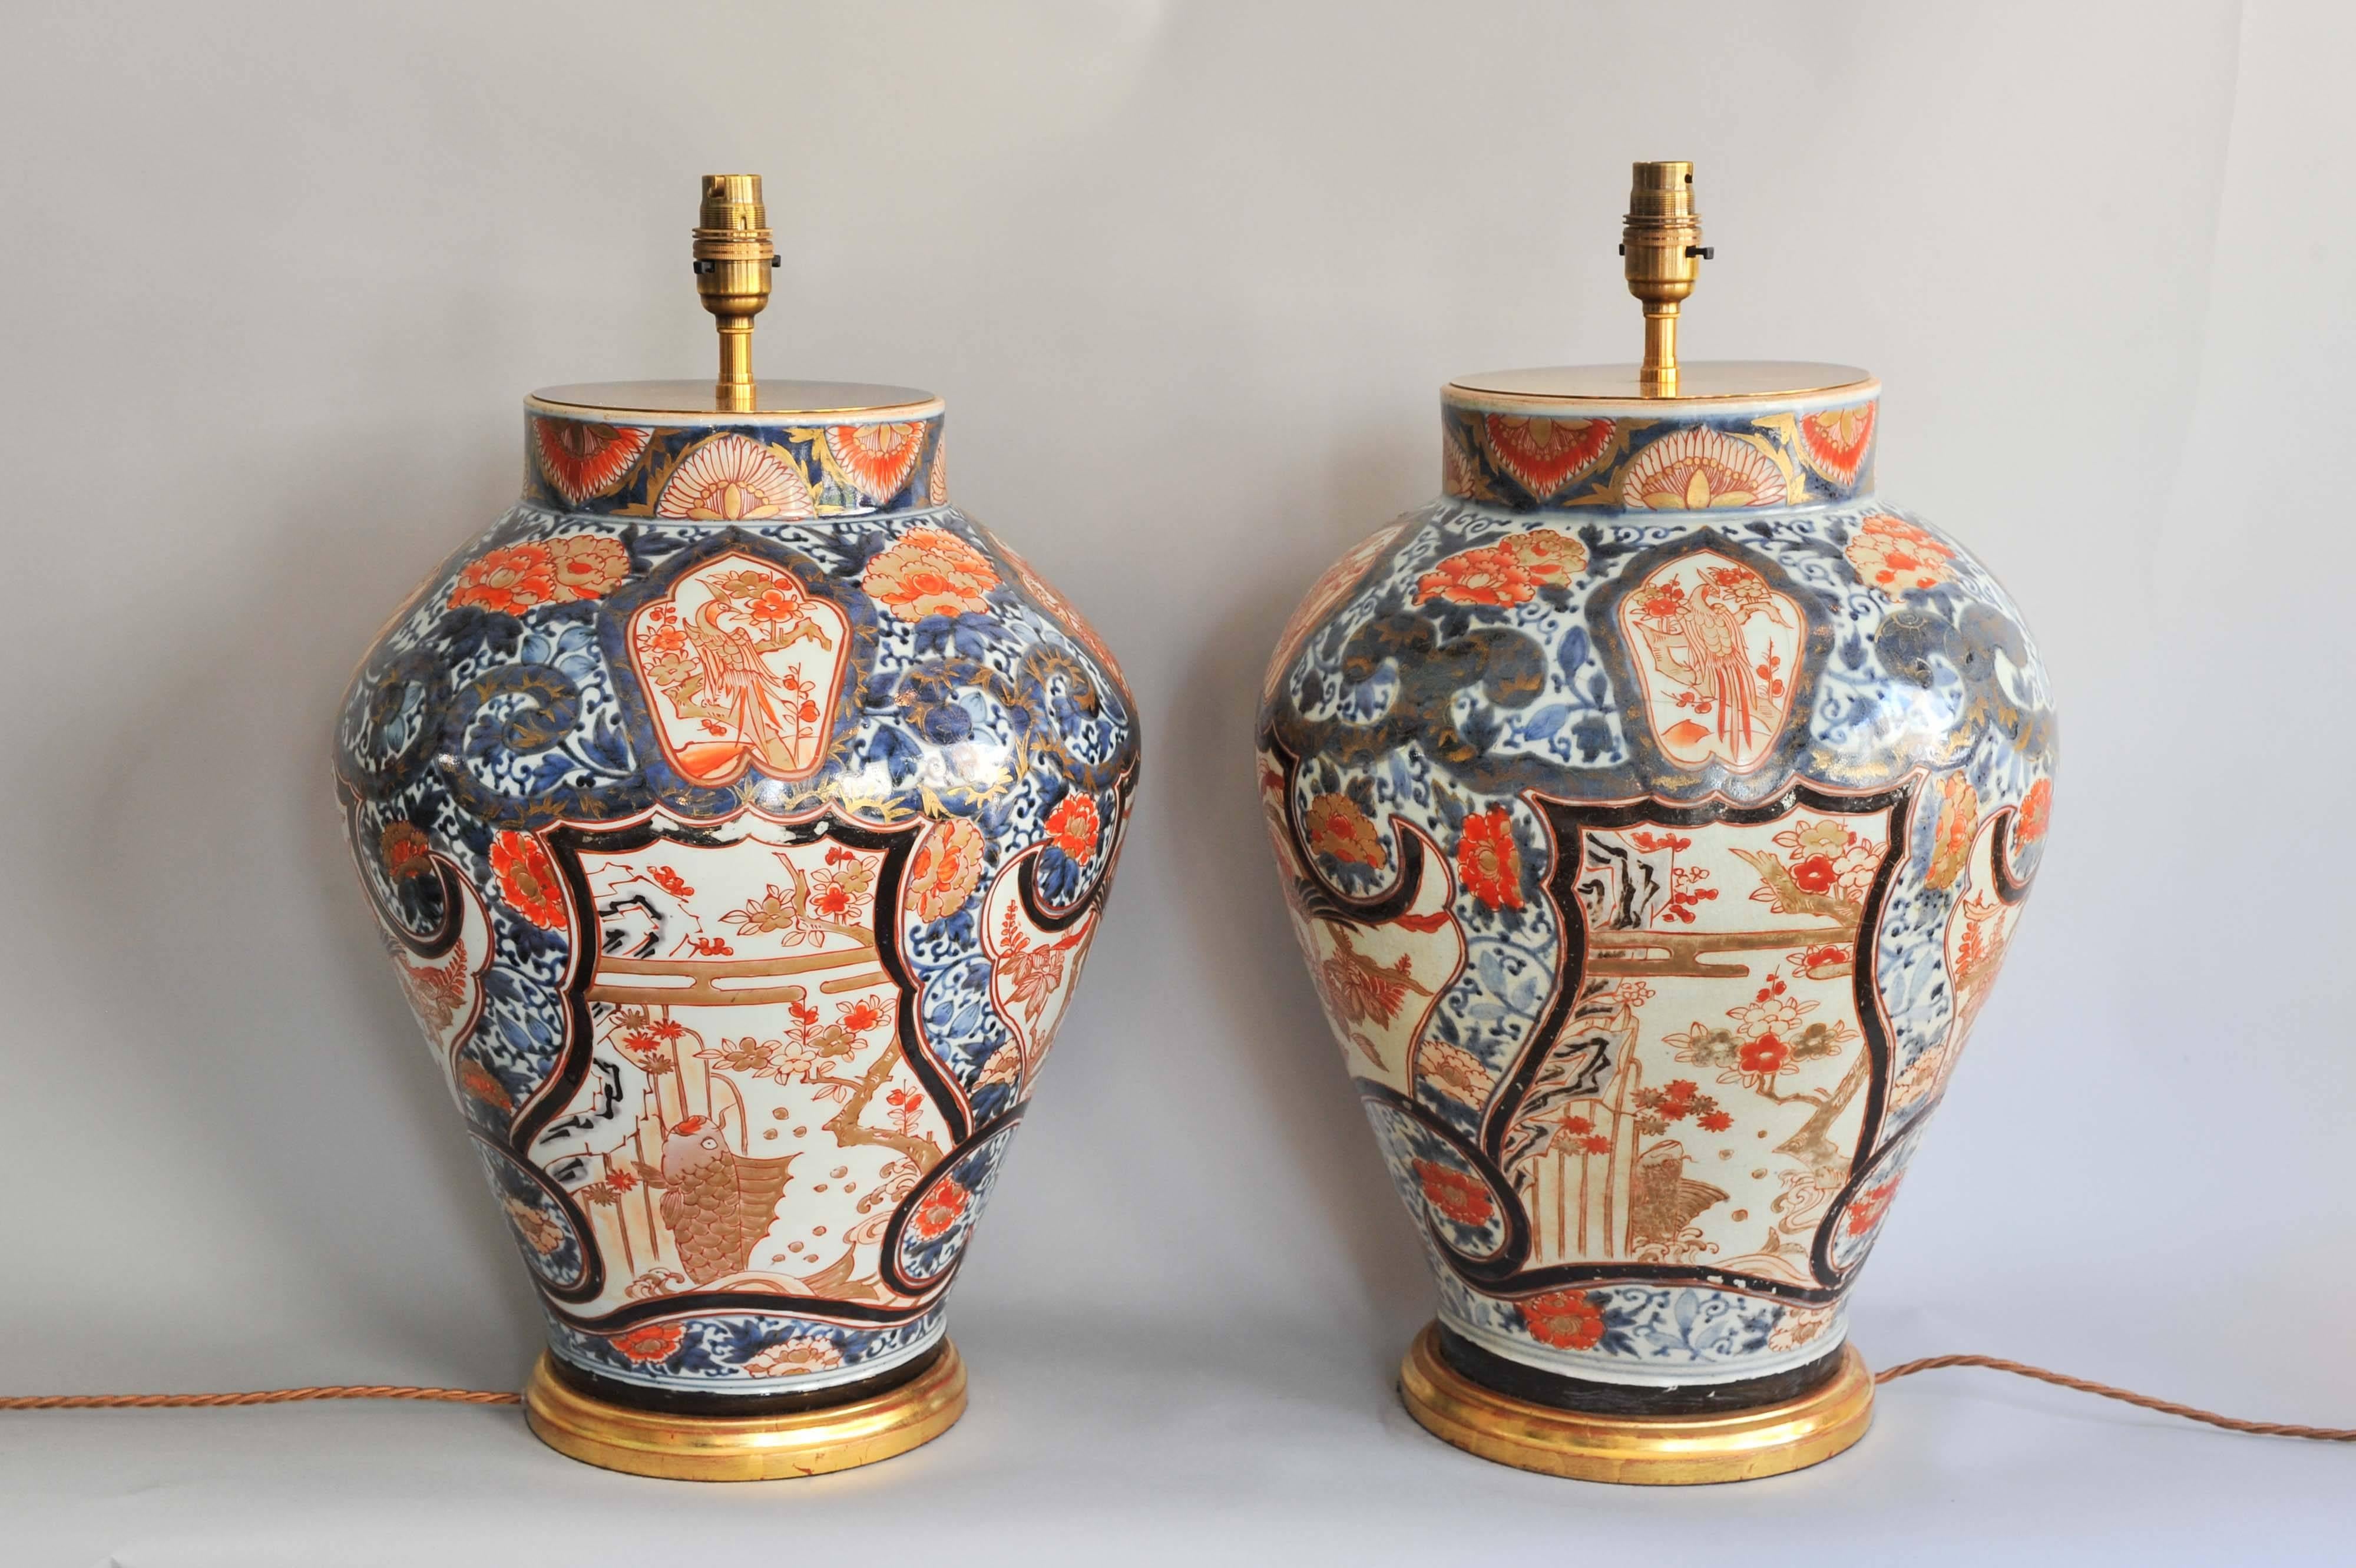 A fine pair of early 18th century Japanese richly decorated imari baluster vases. Lamped on hand-carved and water gilt wooden bases. Both vases have been fitted with antiqued brass plates and adjustable height dual fittings with finals. The vases